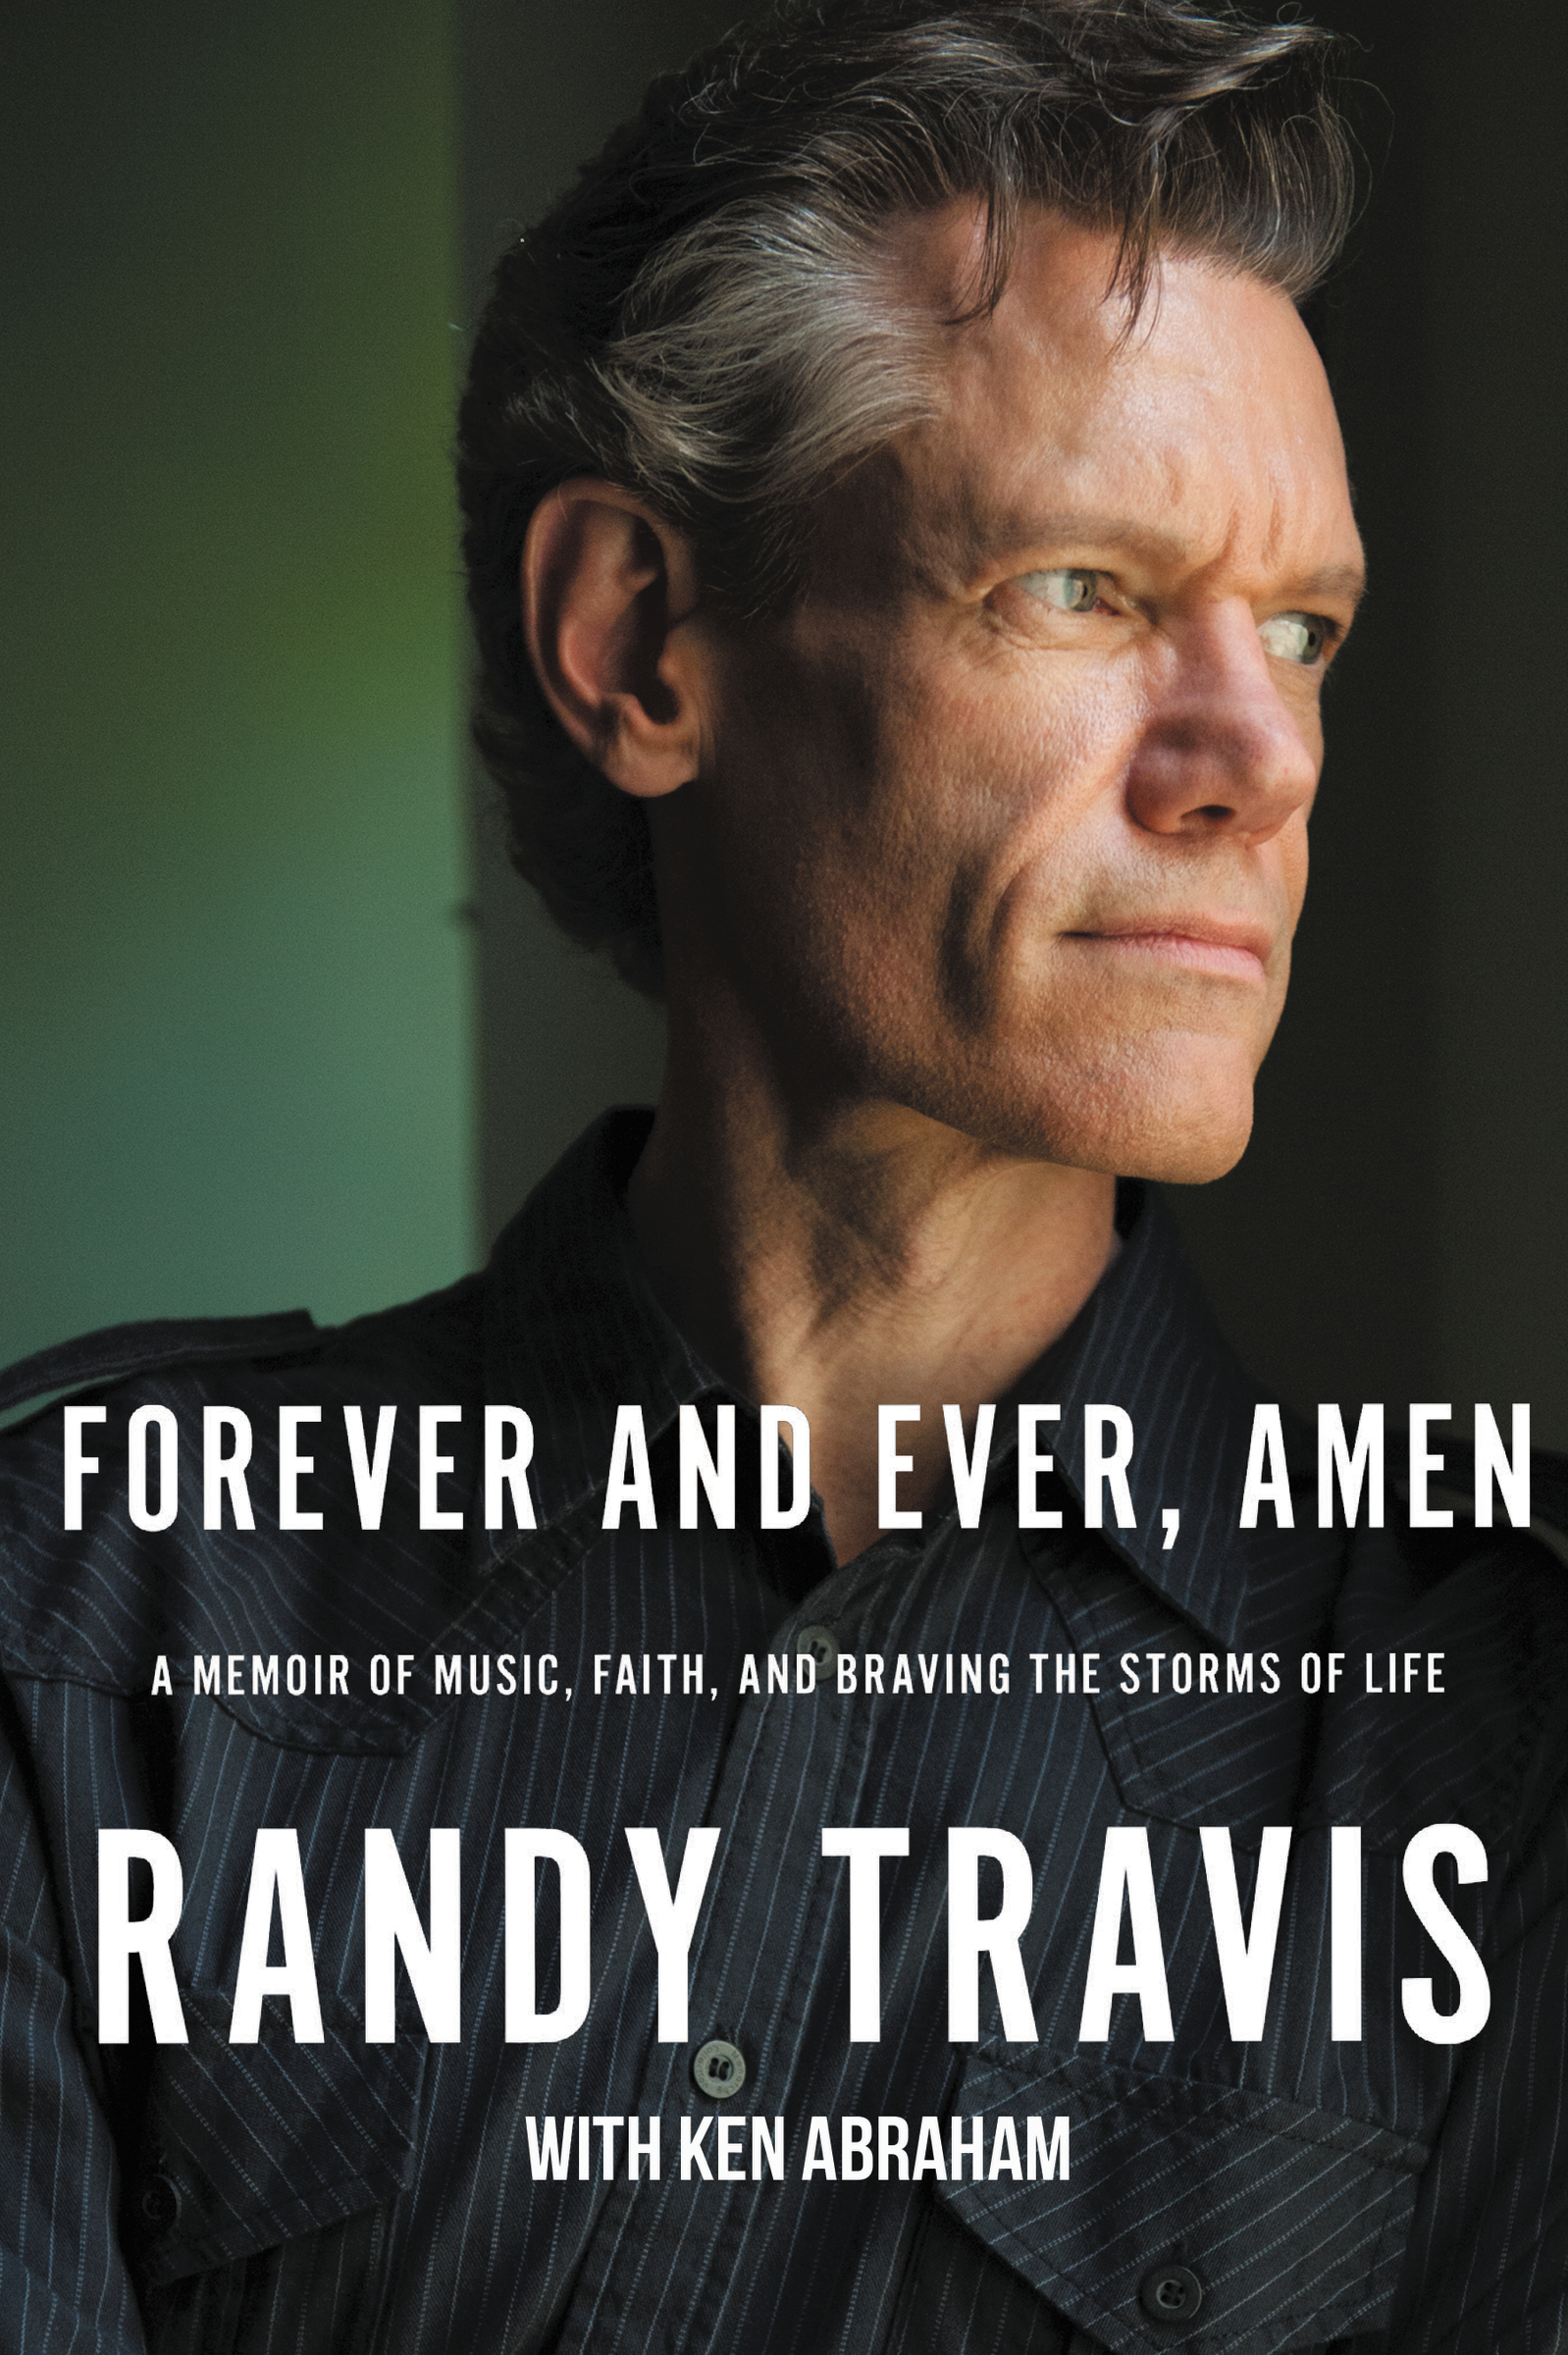 Forever and ever, amen a memoir of music, faith, and braving the storms of life cover image